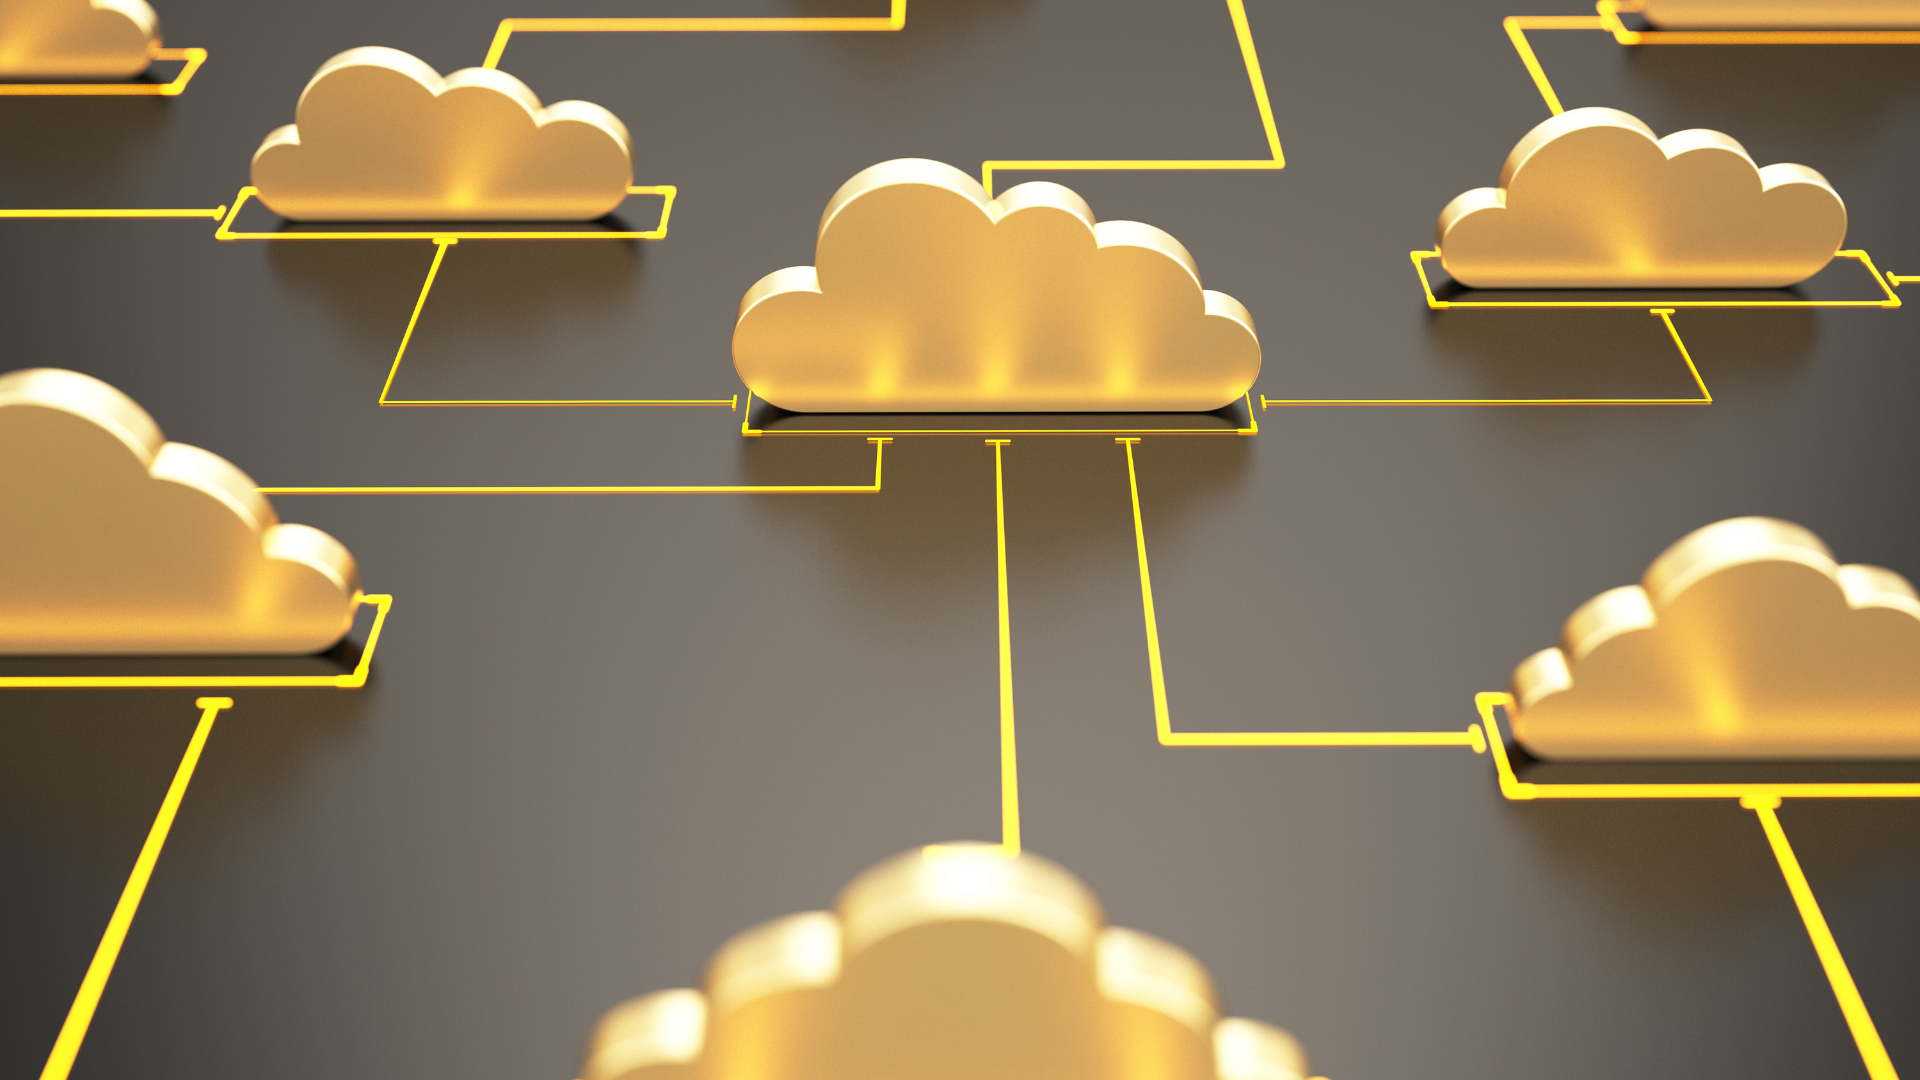 Connected 3D cloud icons to represent software defined and open radio access network architecture